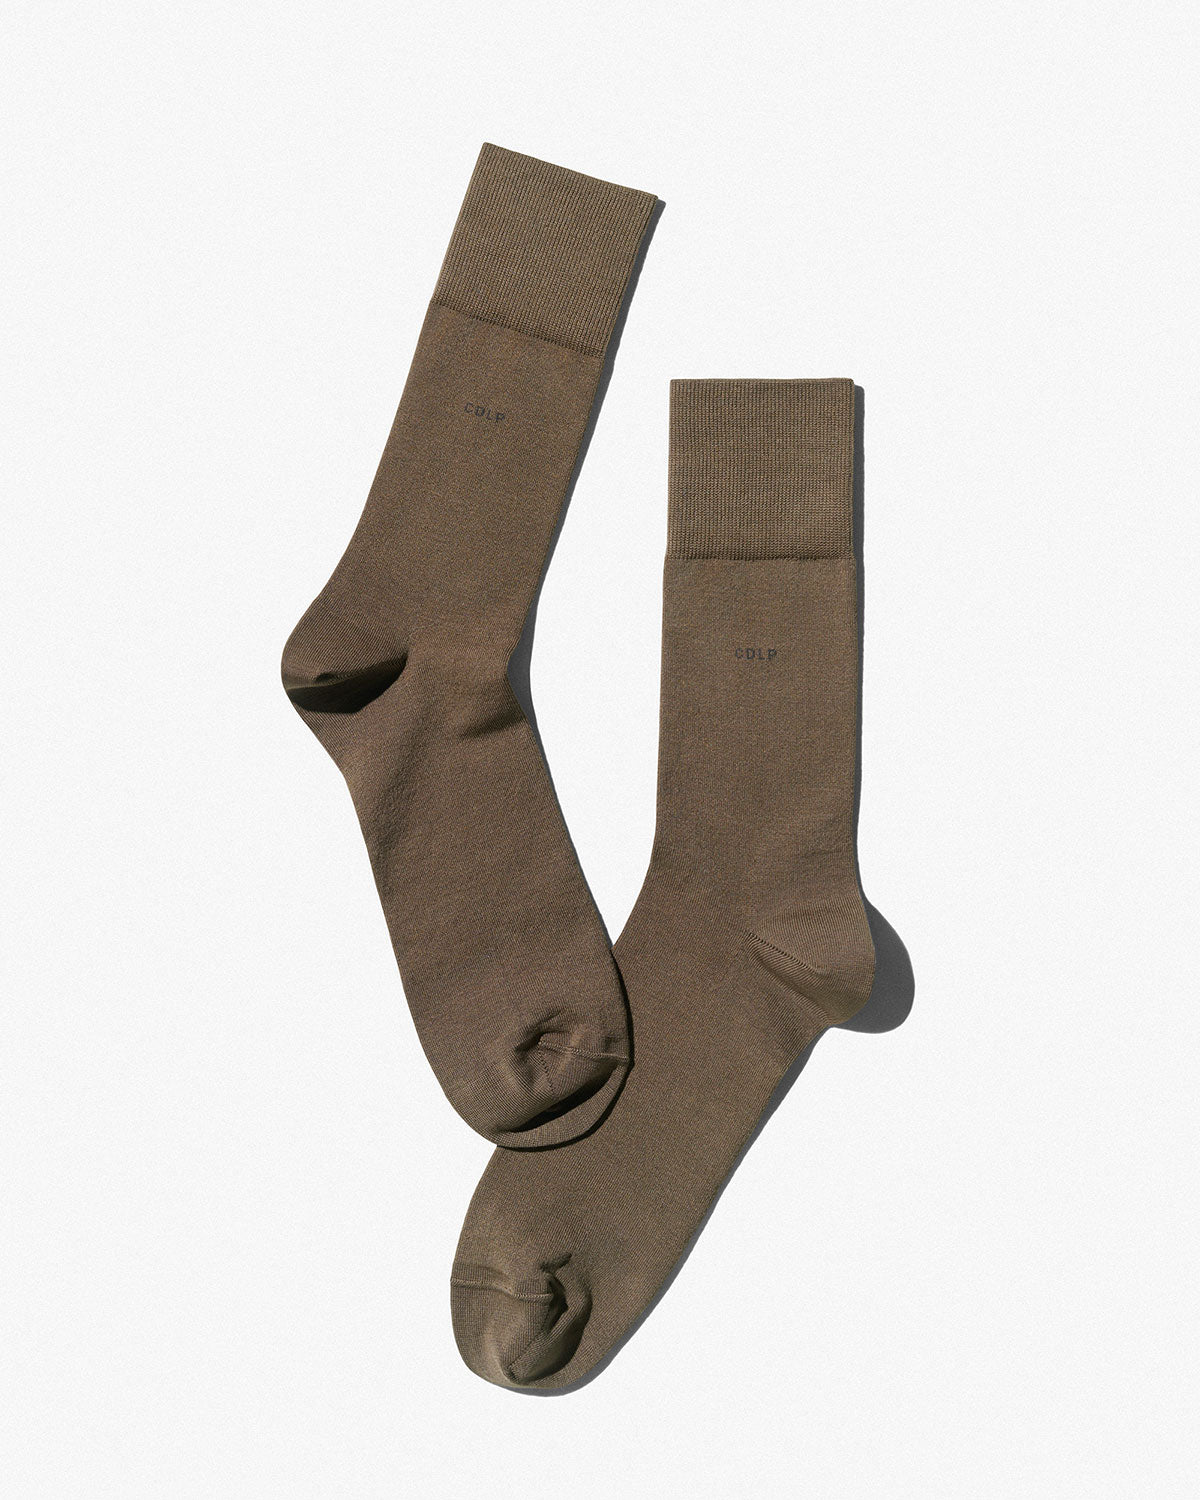 Unisex Mid Length Cotton Socks in Clay